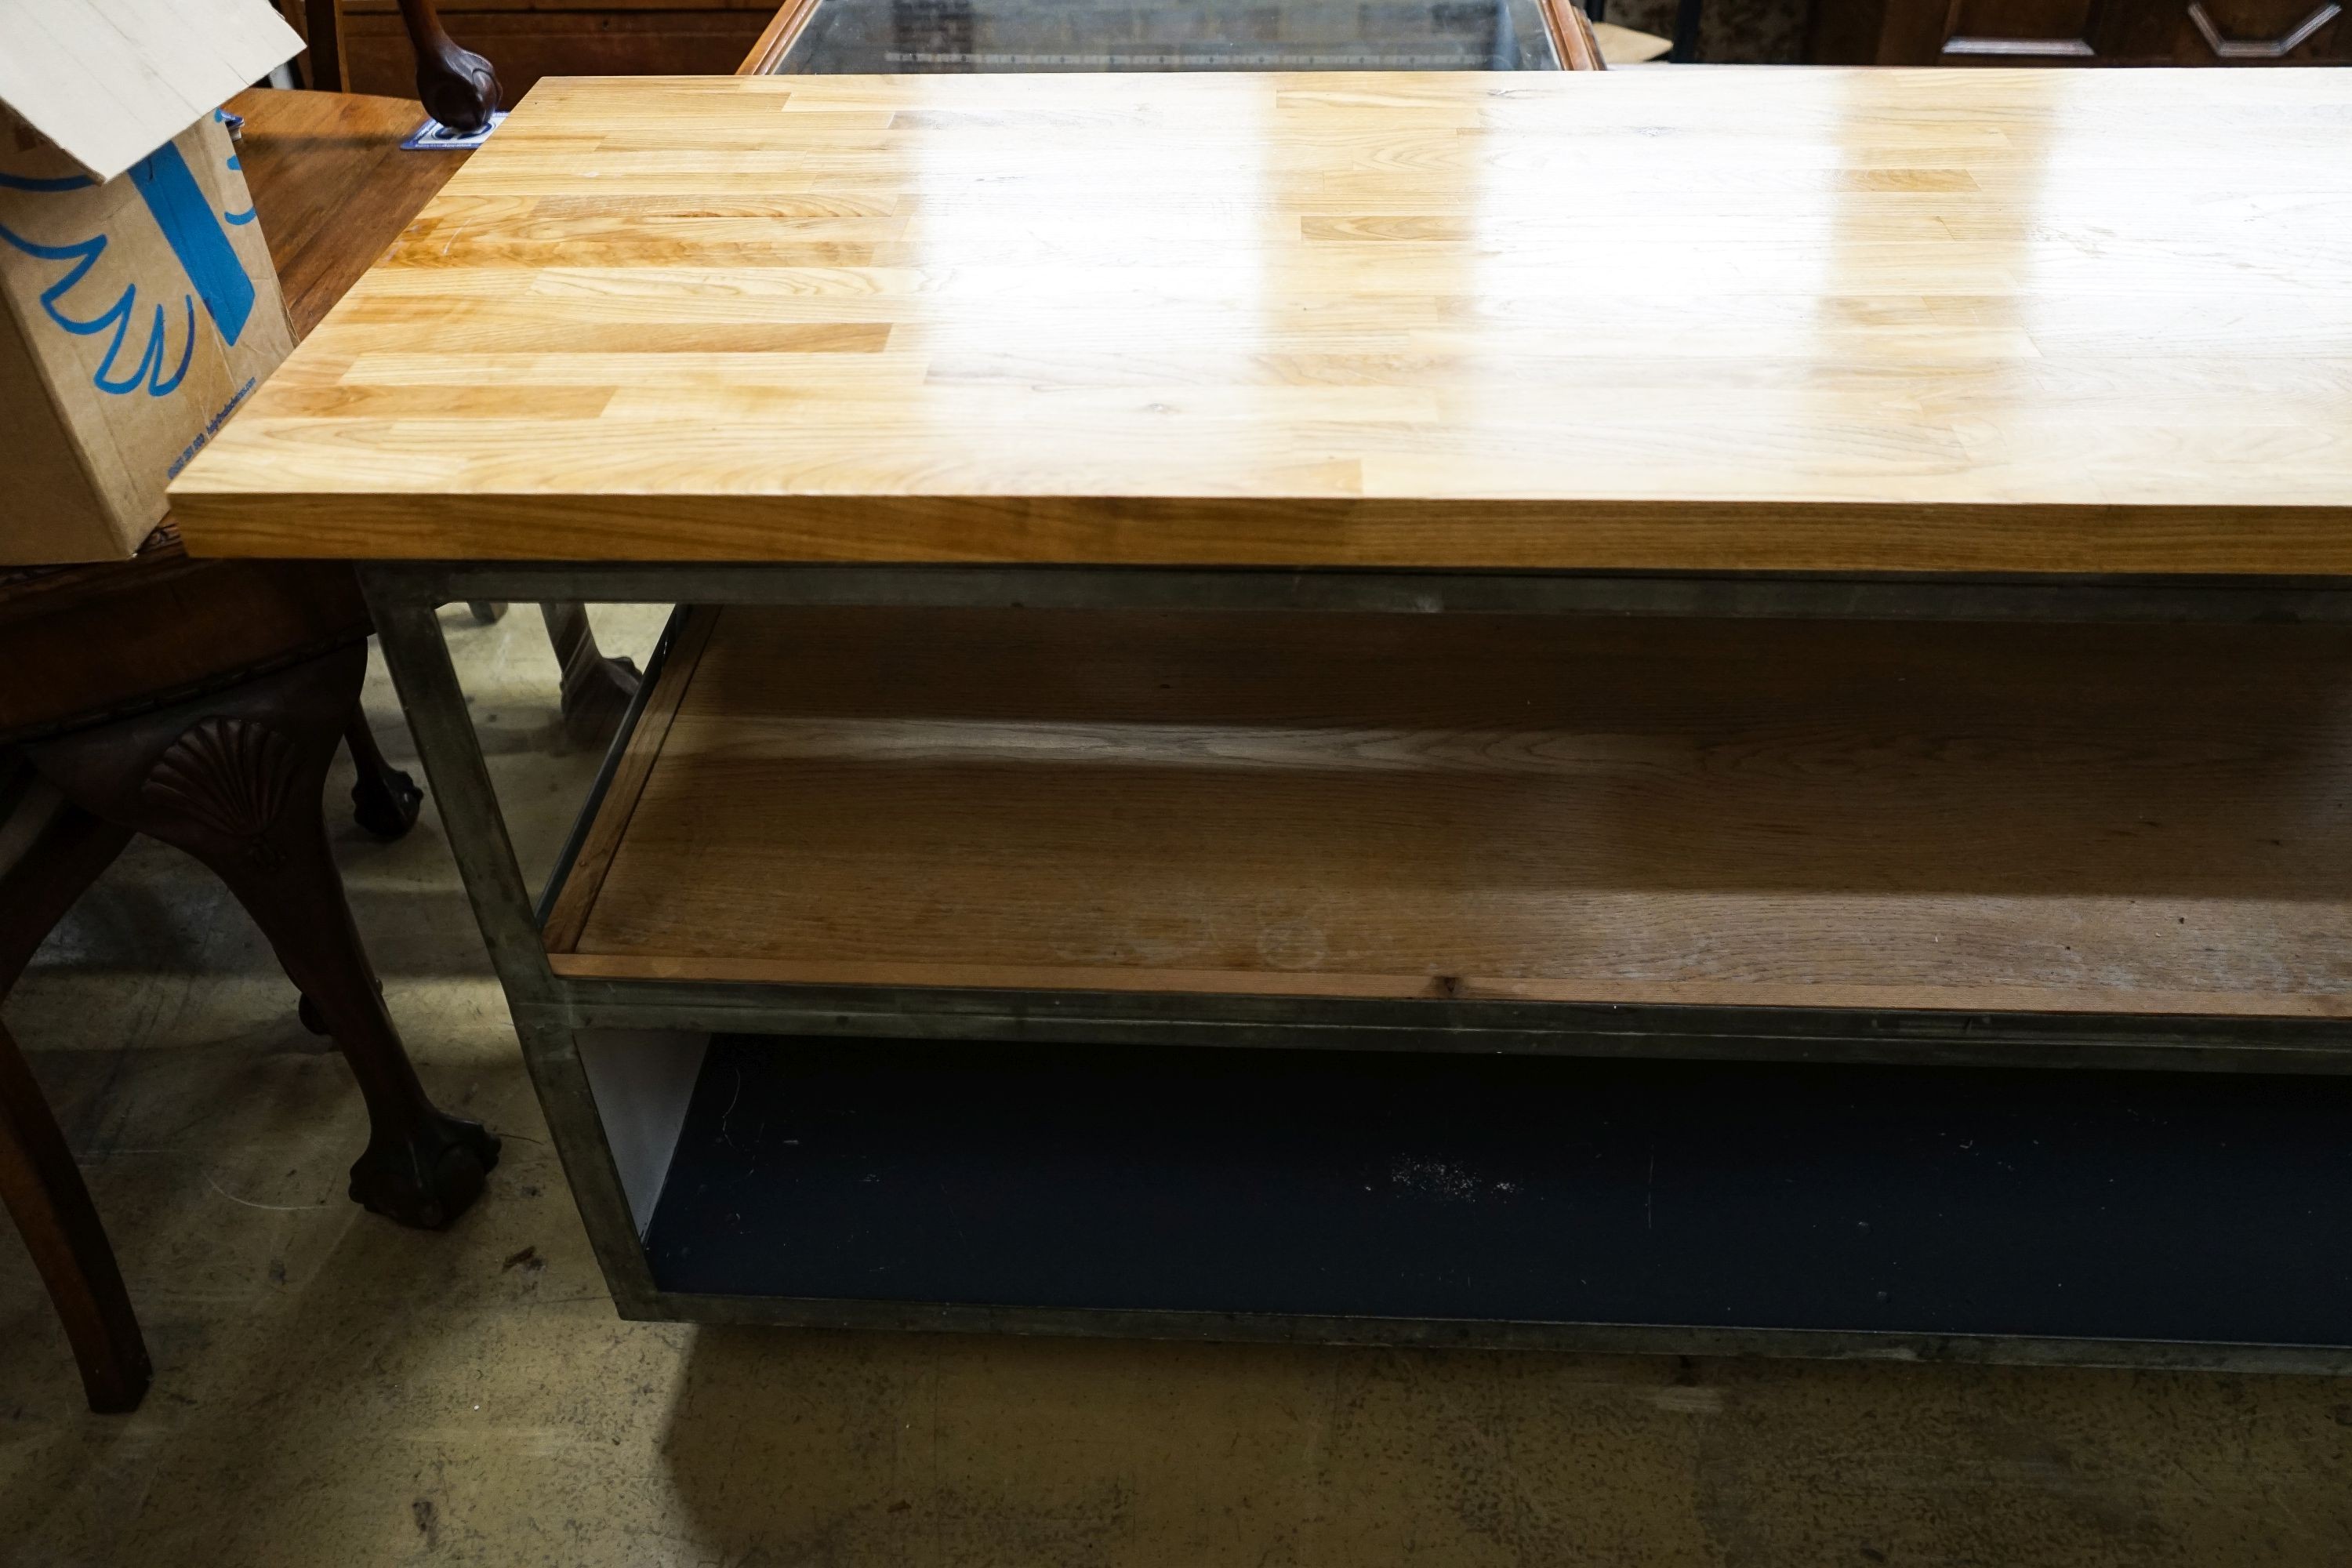 A glazed shop counter now as a kitchen island with removable wood worktop, length 212cm, depth 63cm, height 93cm